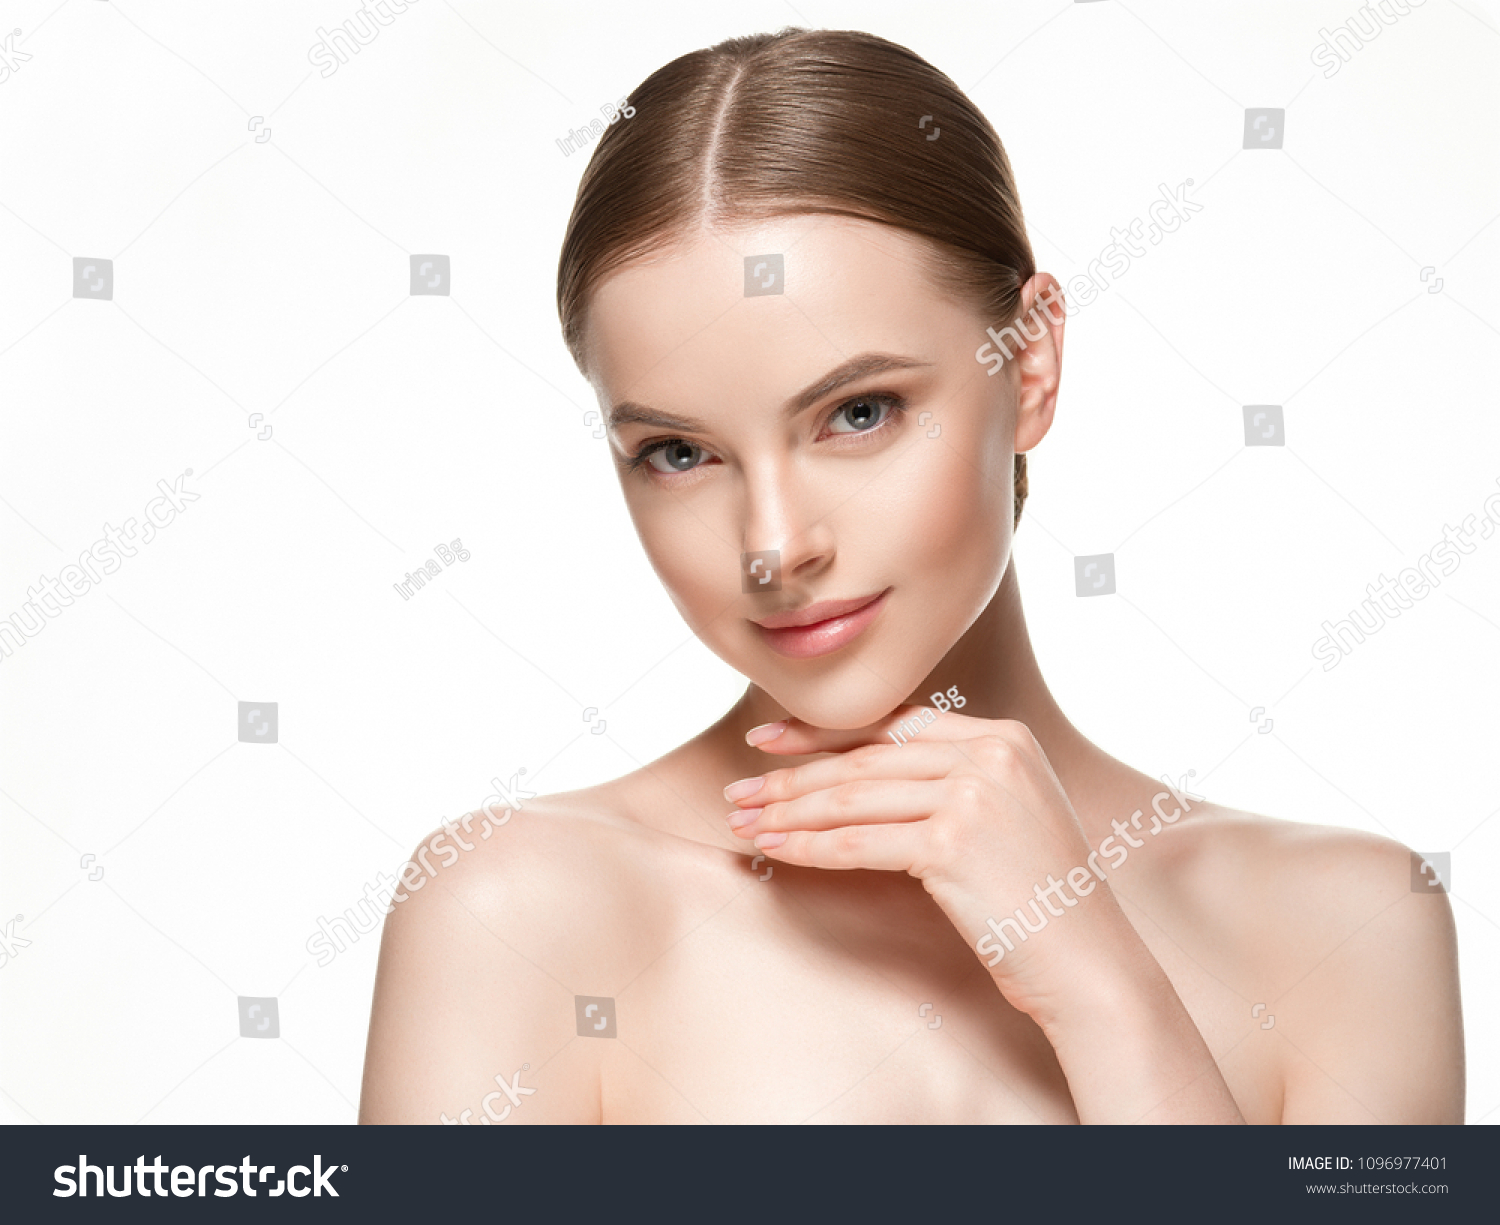 Beautiful woman female skin care healthy hair and skin close up face beauty portrait #1096977401